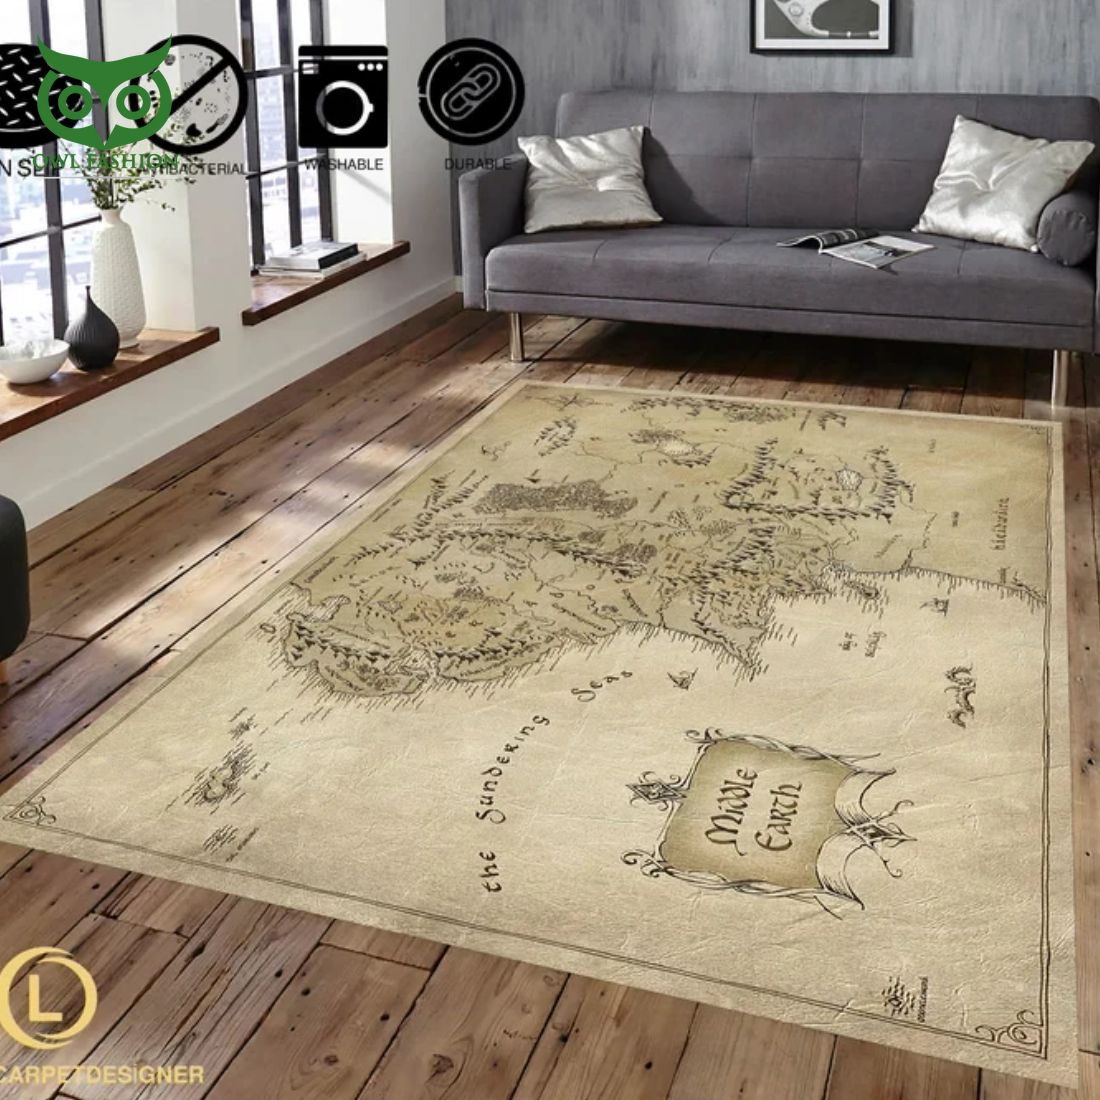 Lord of the Ring Map Carpet Rug Hey! You look amazing dear